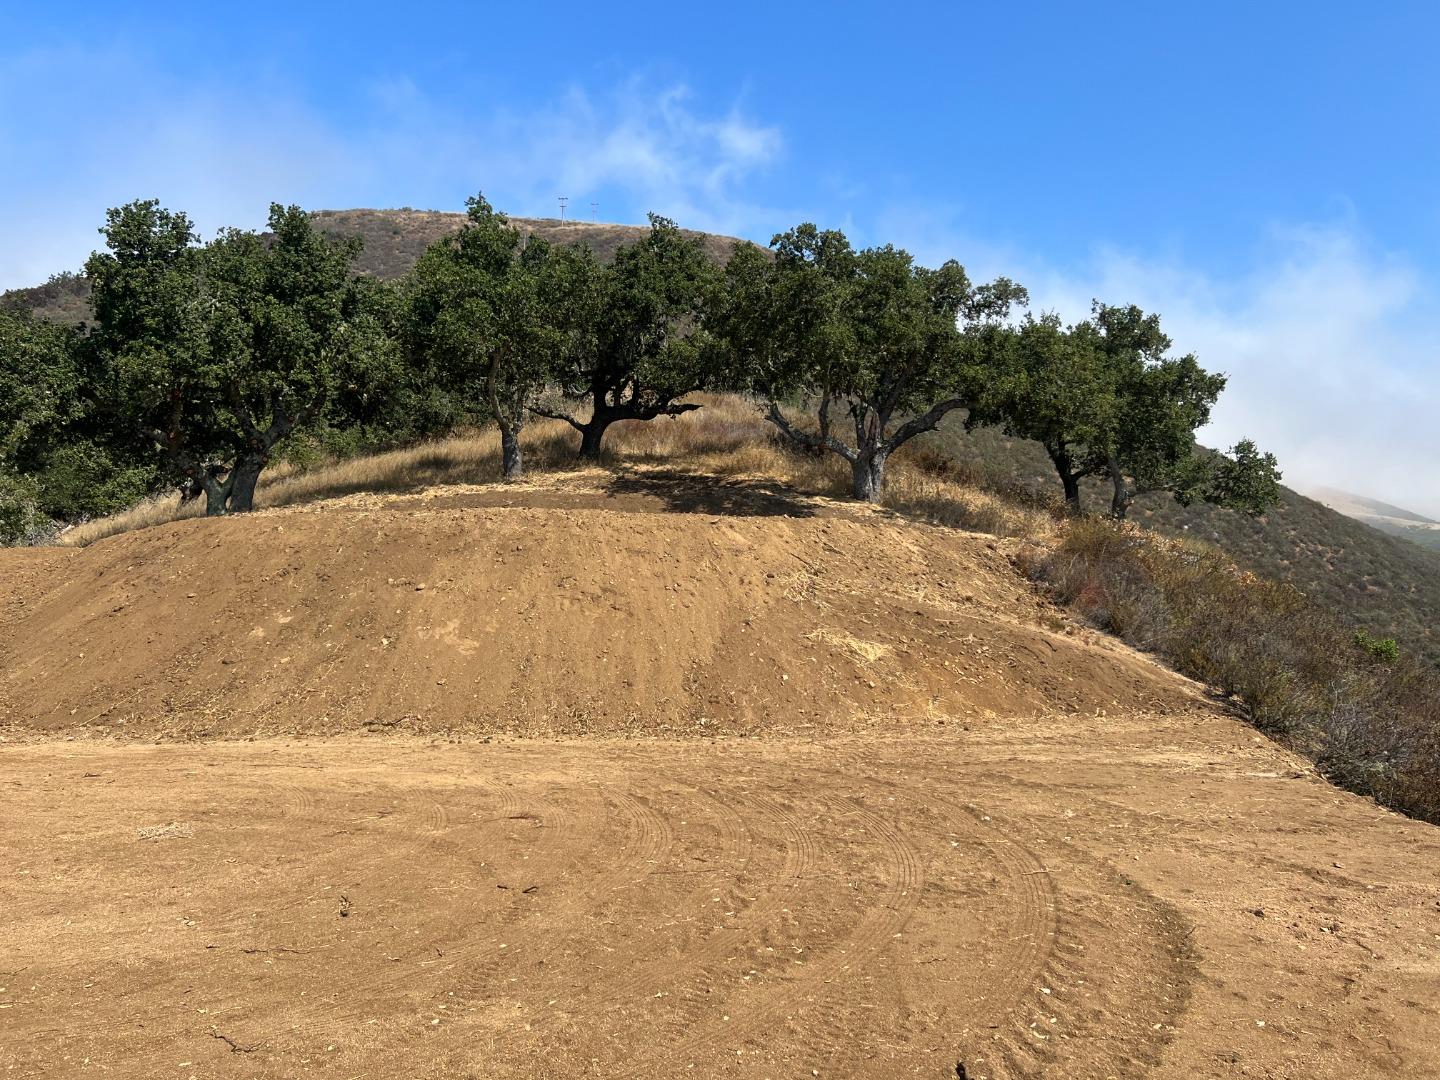 Weathertop Ranch Lot #2, El Caminito Rd, Carmel Valley, California, 93924, United States, ,Land,For Sale,Weathertop Ranch Lot #2, El Caminito Rd,1339286